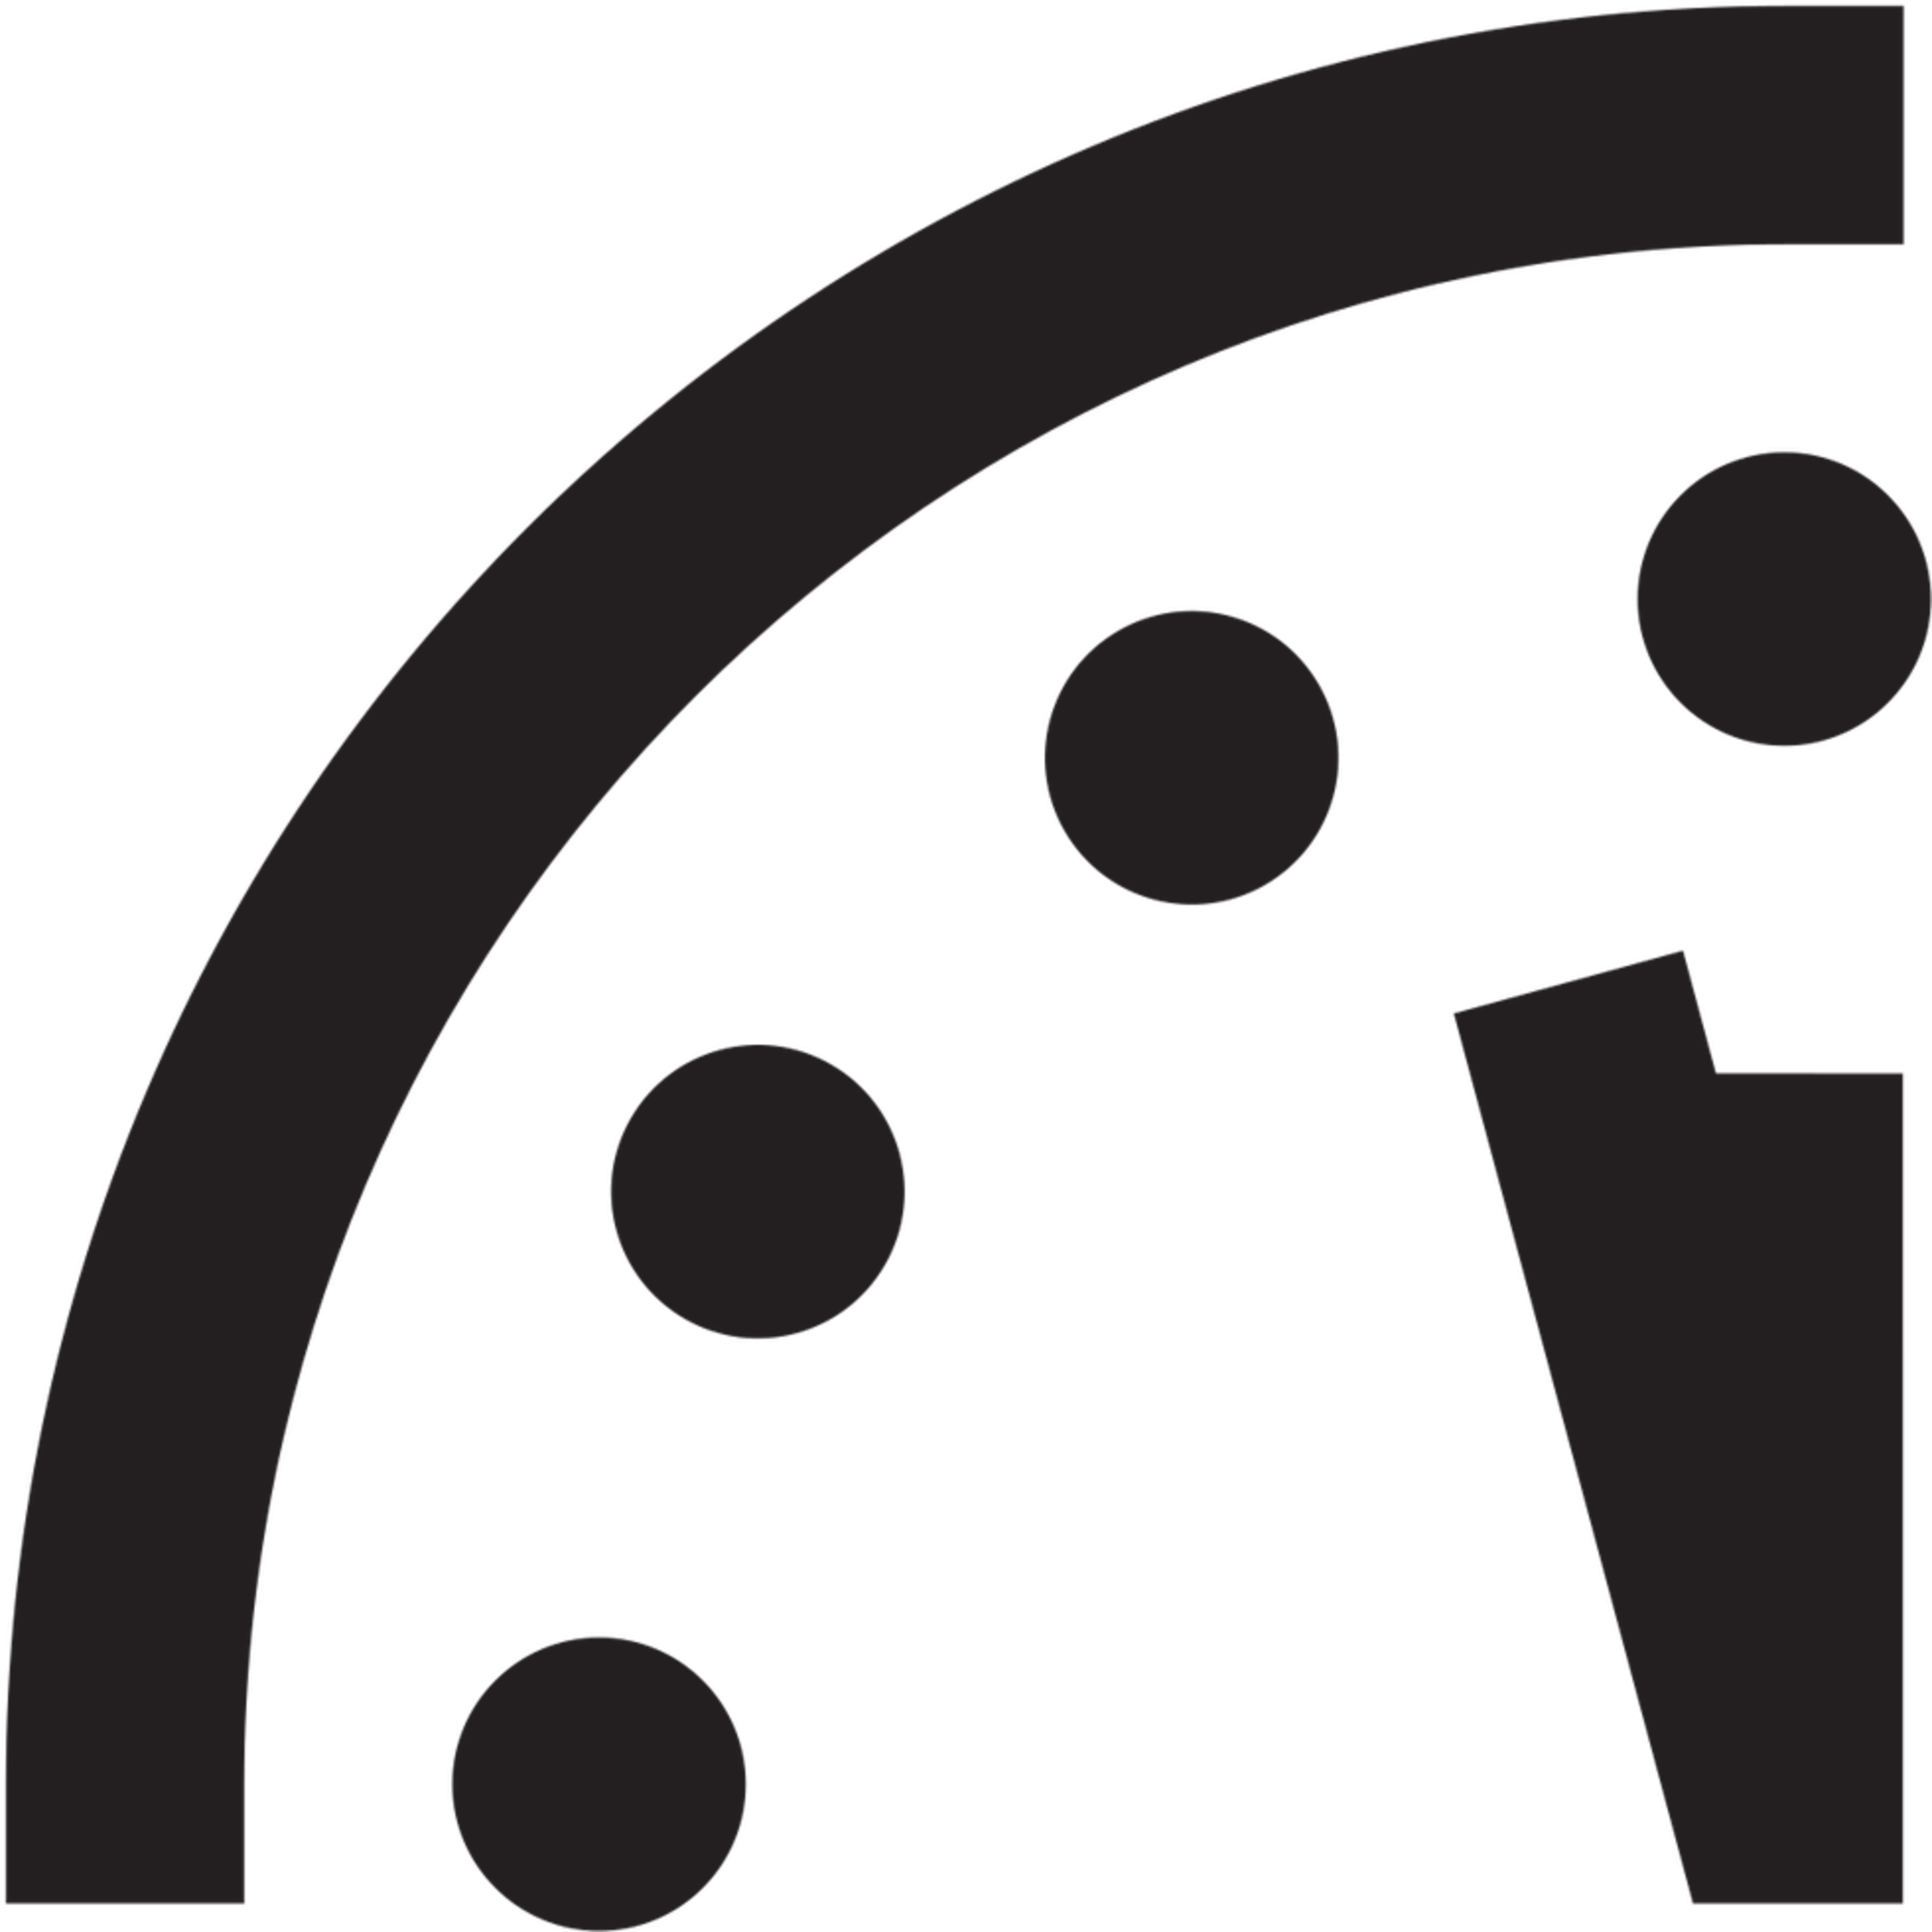 Clock With Arrows At 11.